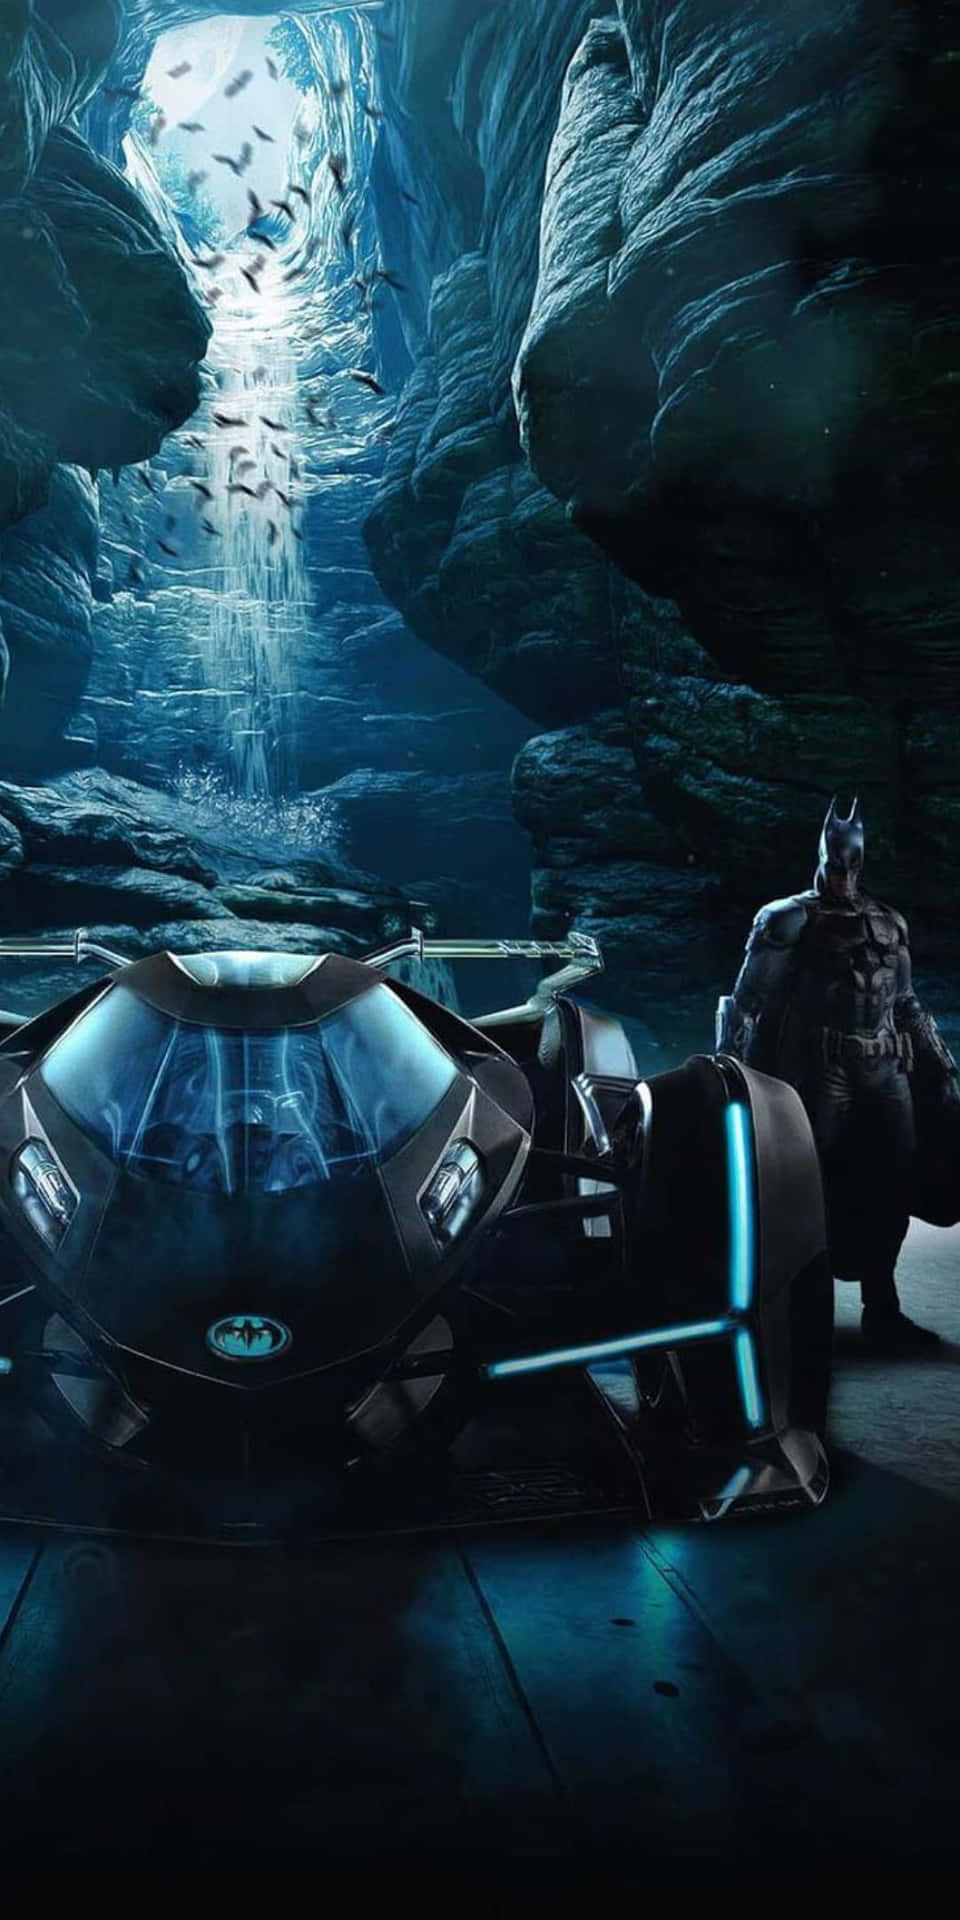 Experience the excitment of Batman's famous Batmobile in Pixel 3's stunning launch event